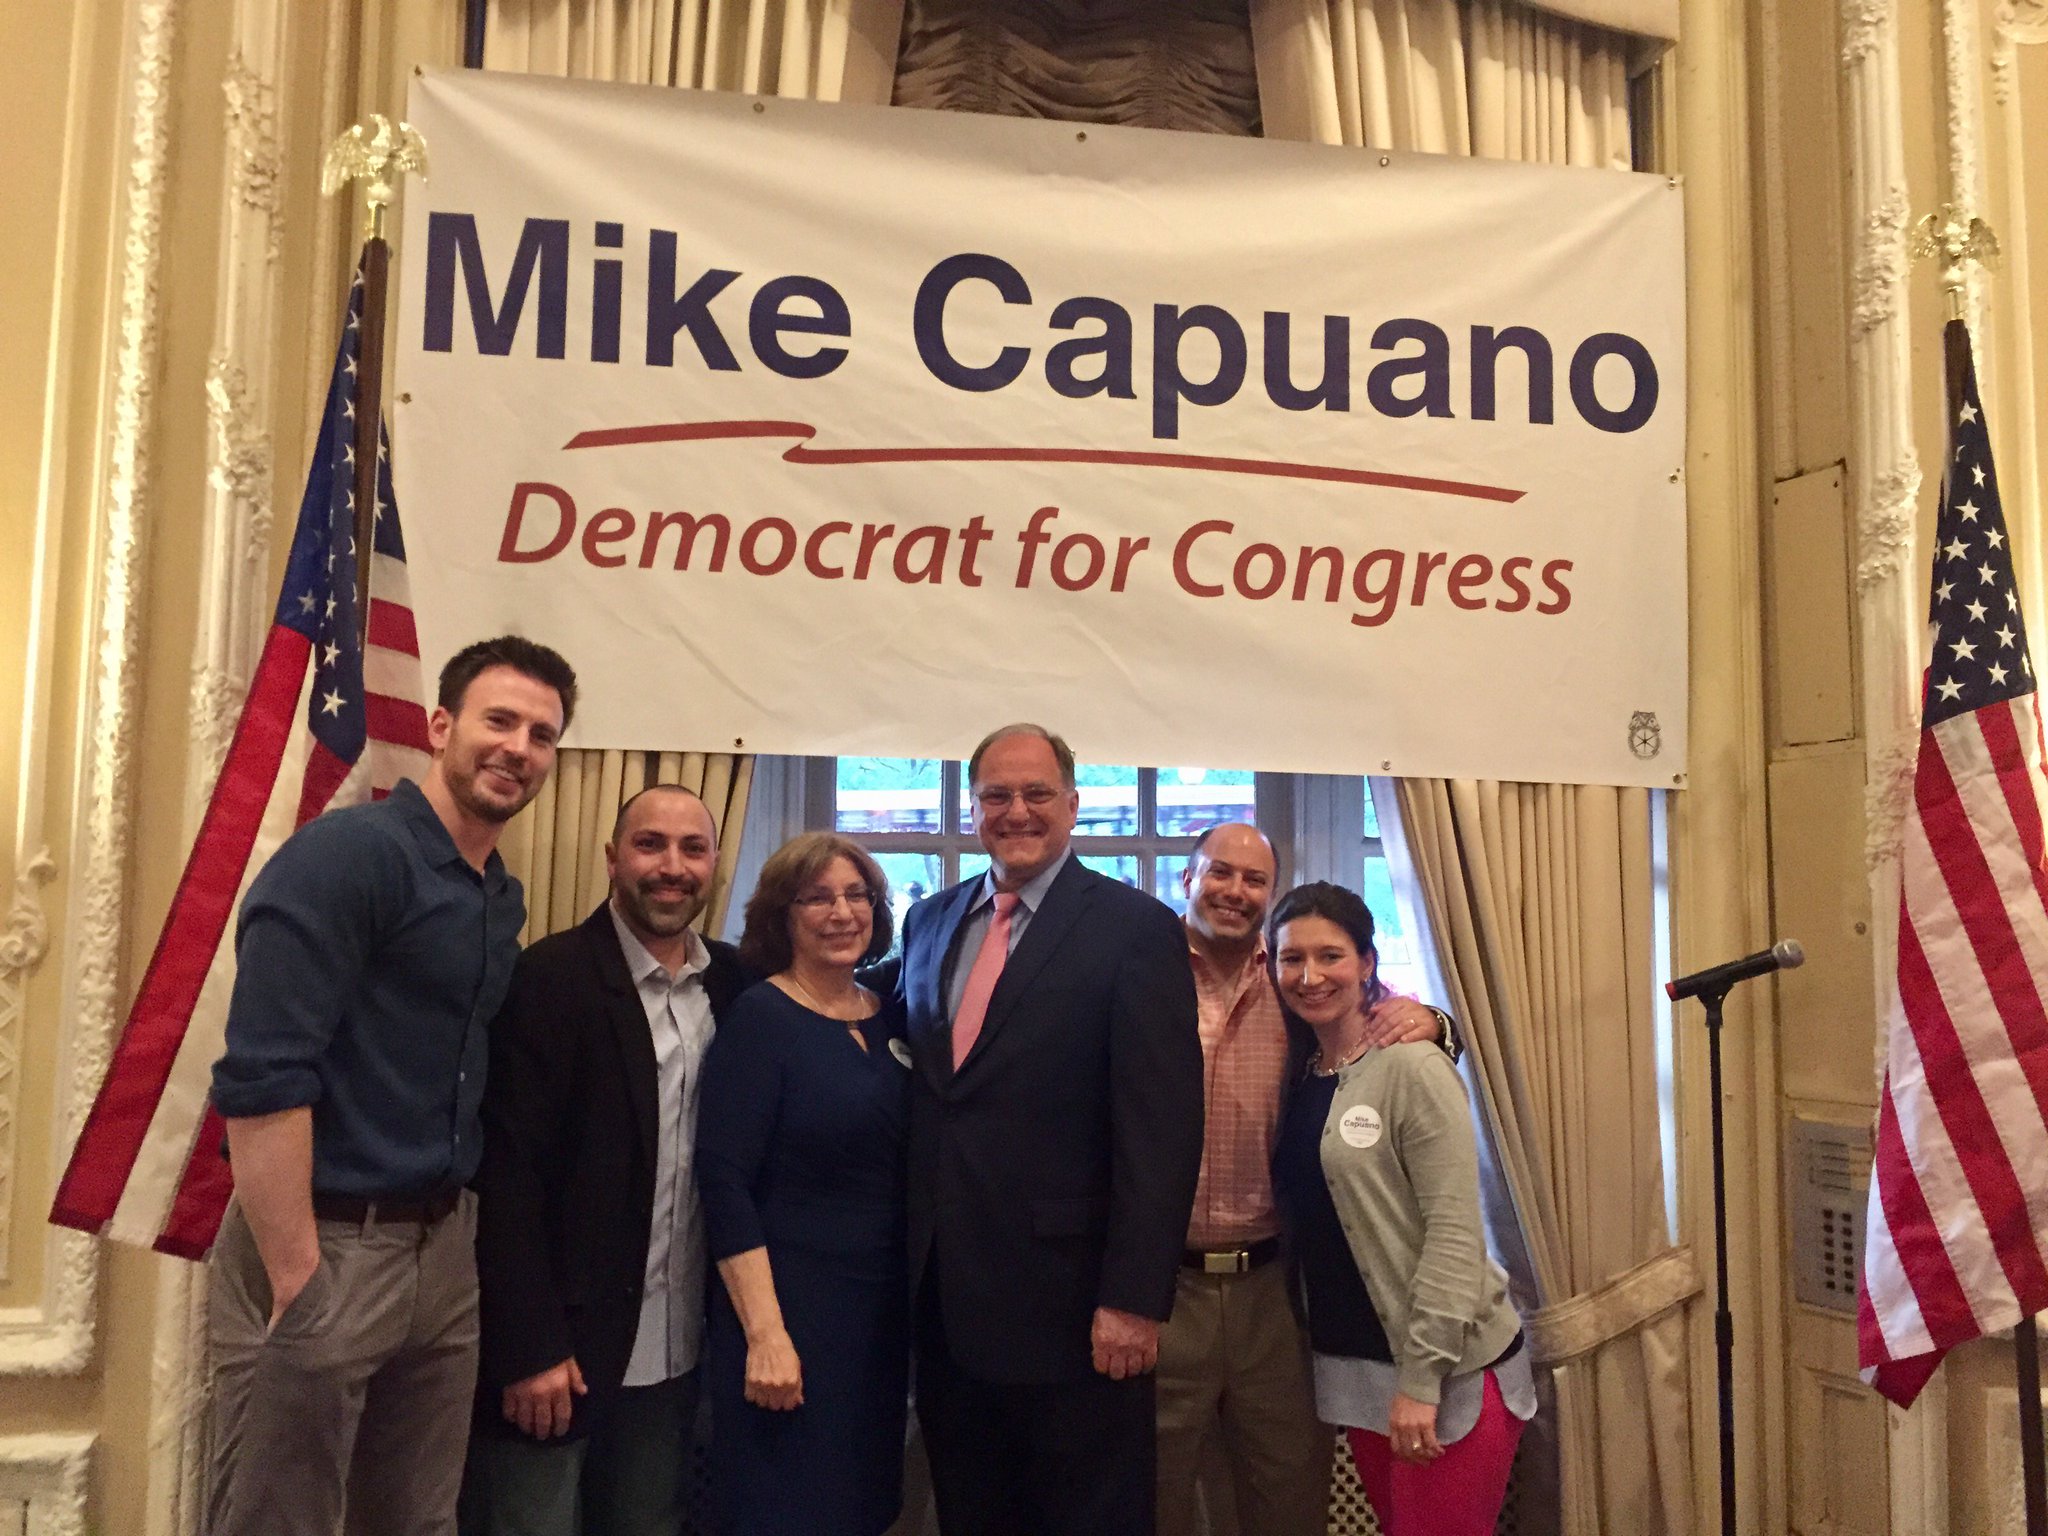 Mike Capuano on Twitter: "Thank you to my family, including my nephew @chrisevans, for your support. Together, we'll keep fighting to create more opportunities for everyone, and I won't stop until the